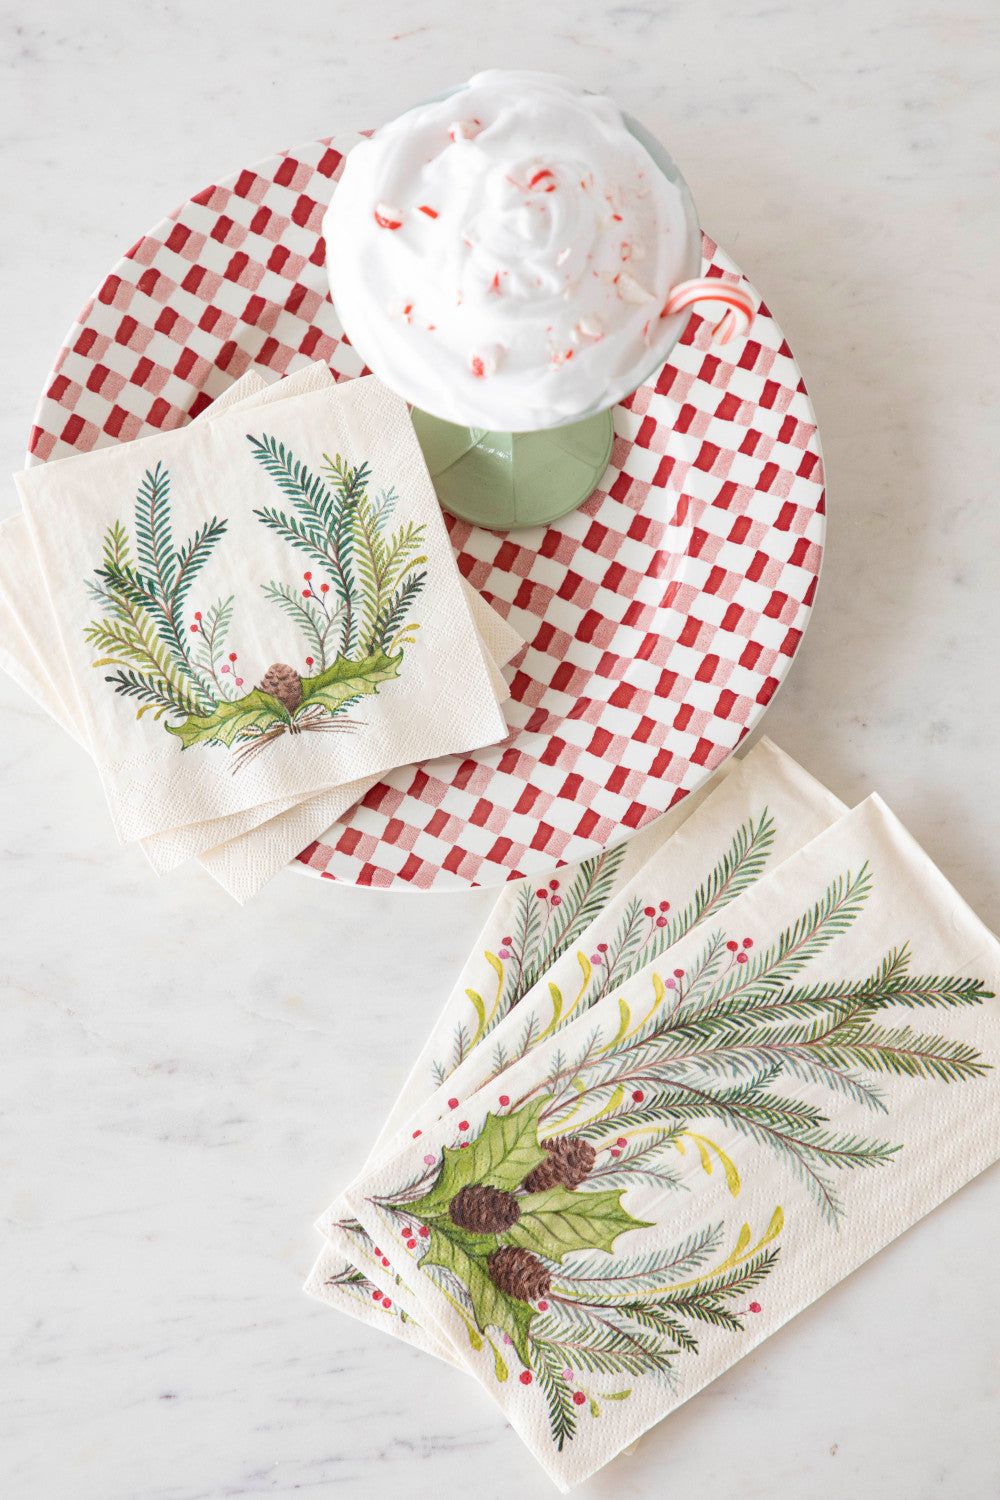 A top-down view of a table with a stack of Christmas Sprigs Cocktail Napkins and a stack of Christmas Sprigs Guest Napkins, fanned out next to a red and white plate and a cup of hot chocolate.